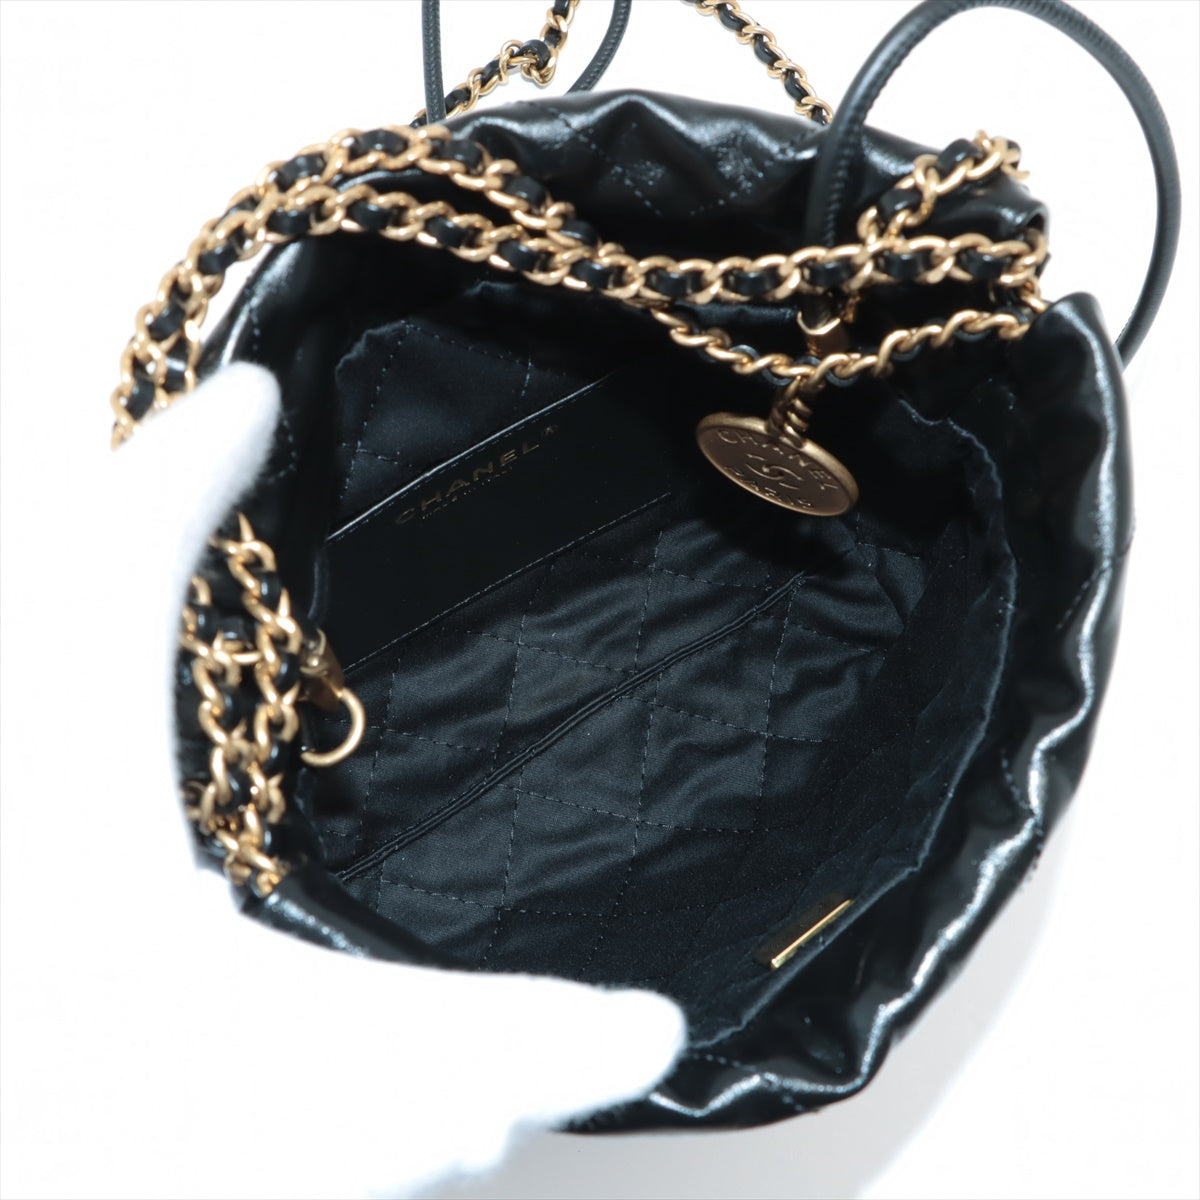 Chanel Chanel 22 mini Leather 2way shoulder bag Chain Black Gold Metal fittings